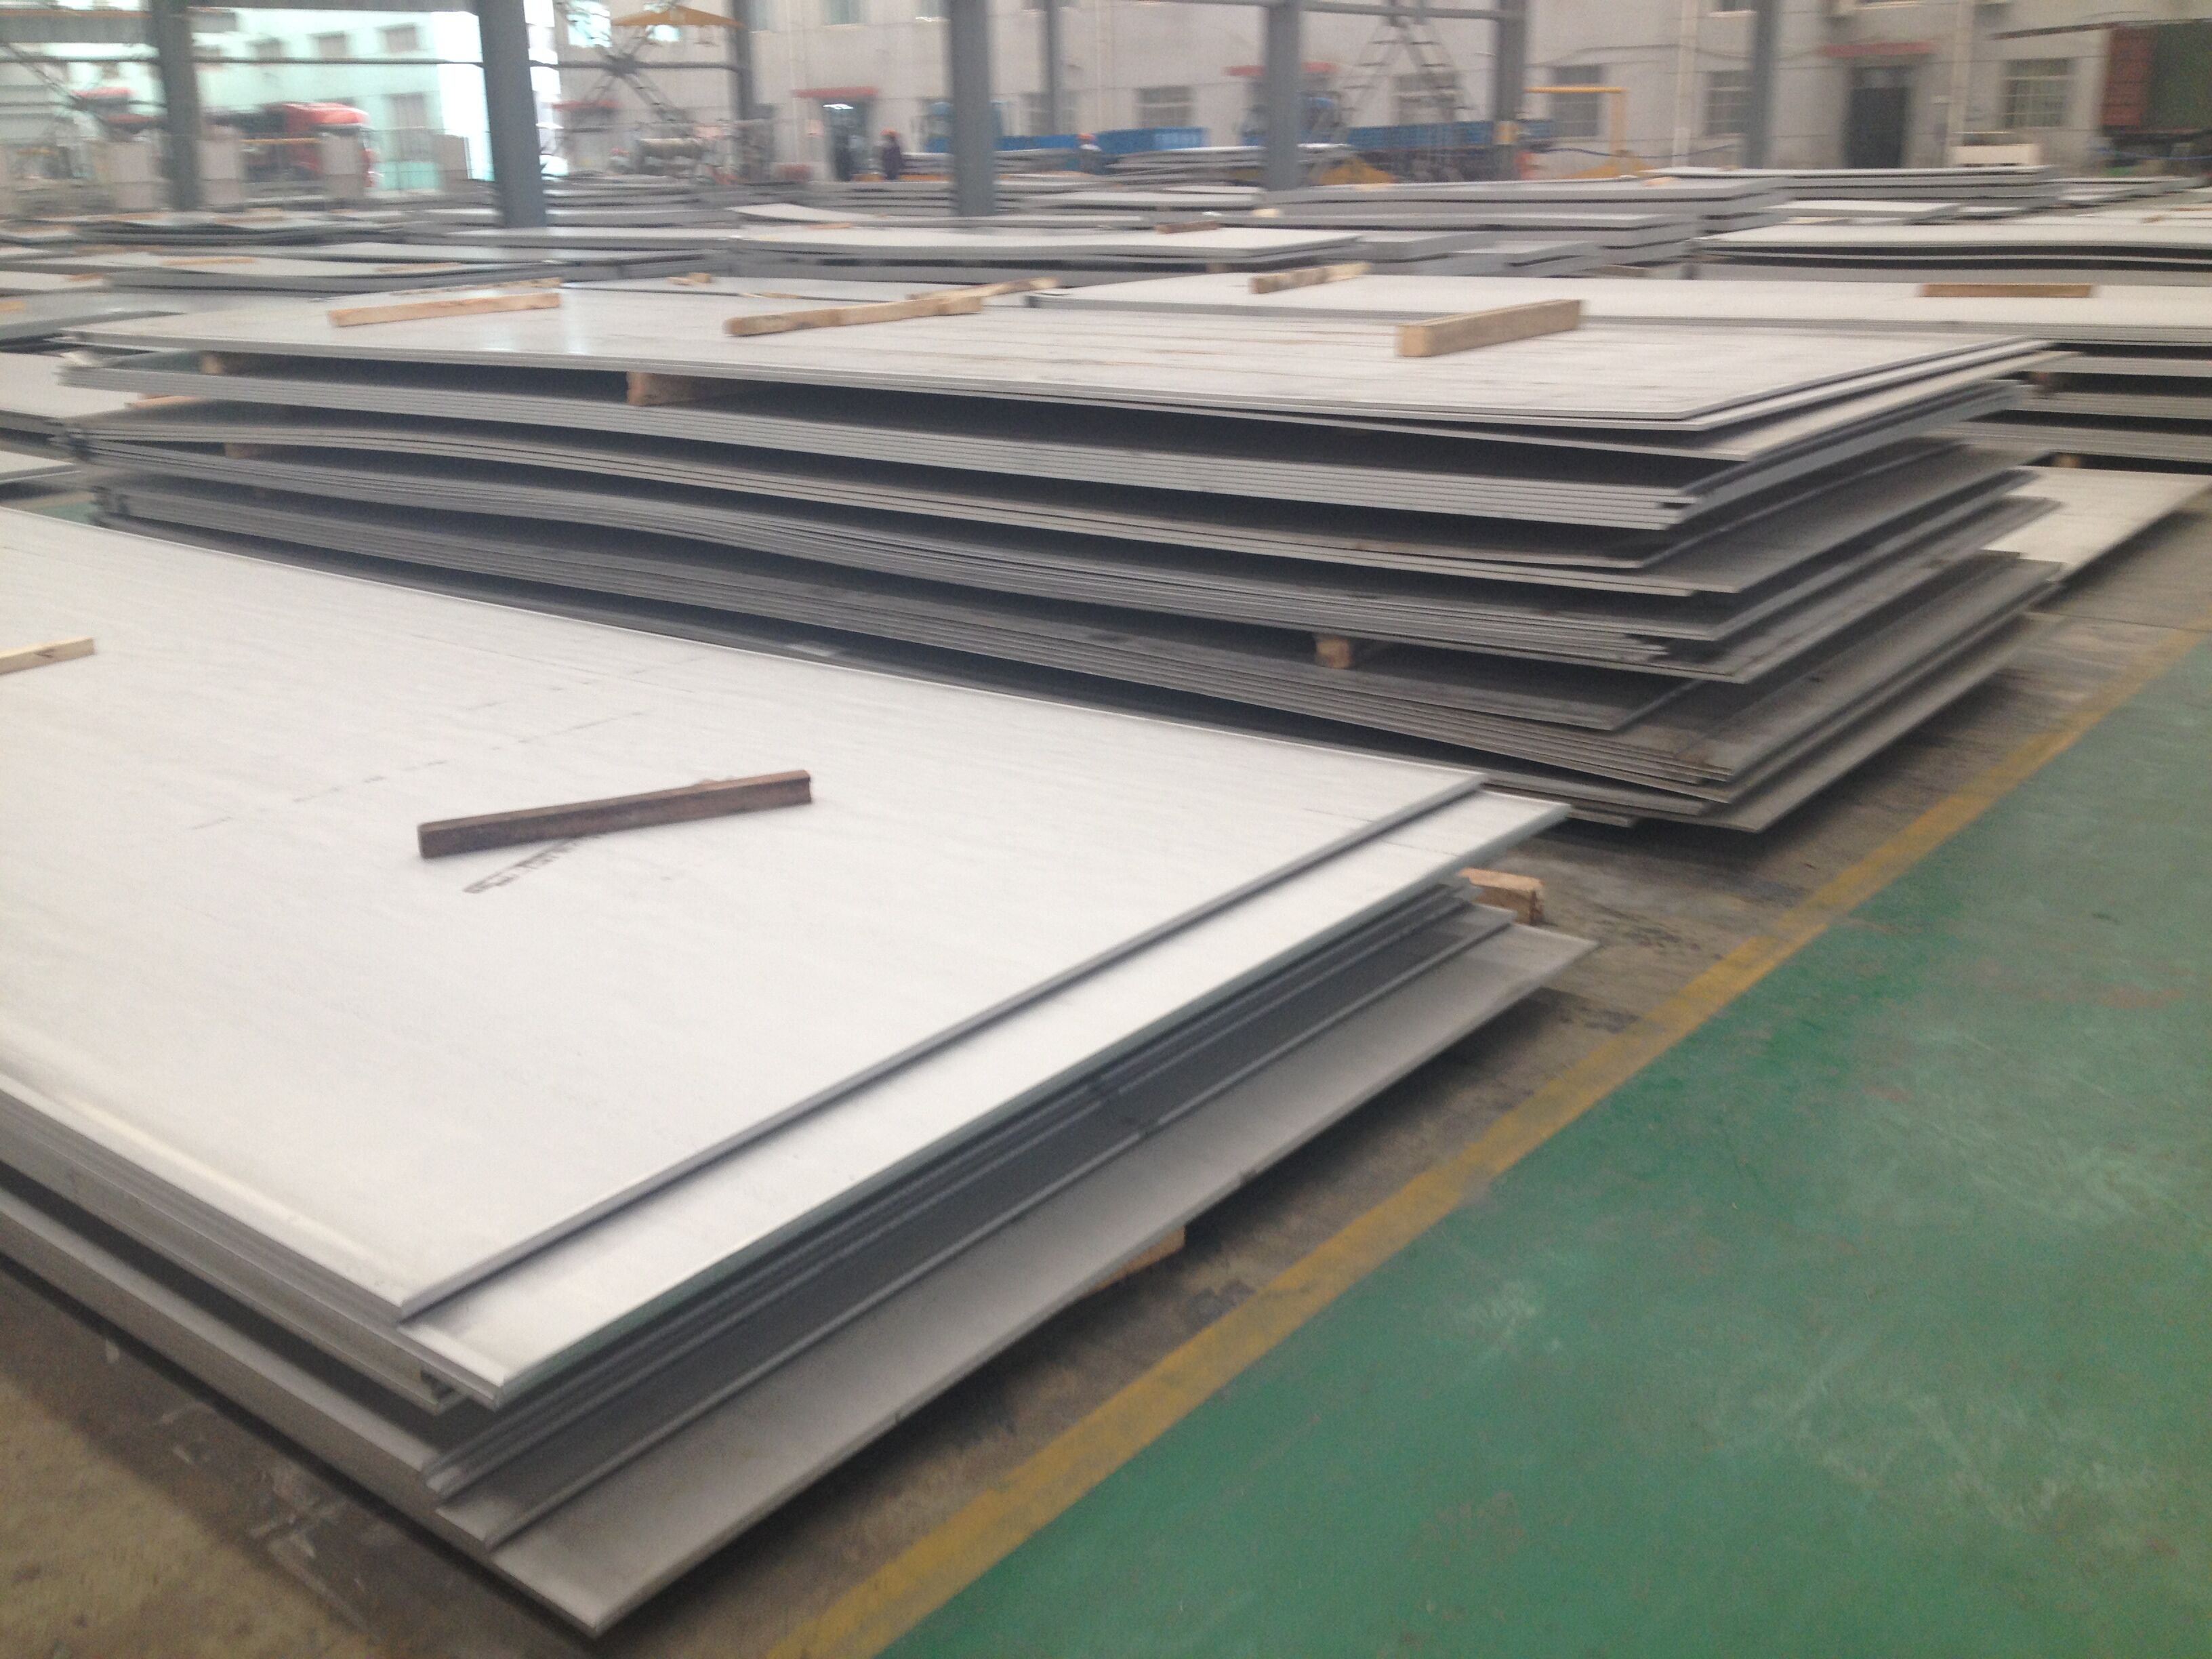 China Wholesale Marine Steel Plate Suppliers - 440 stainless steel plate  440stainless steel coil – Wenyue